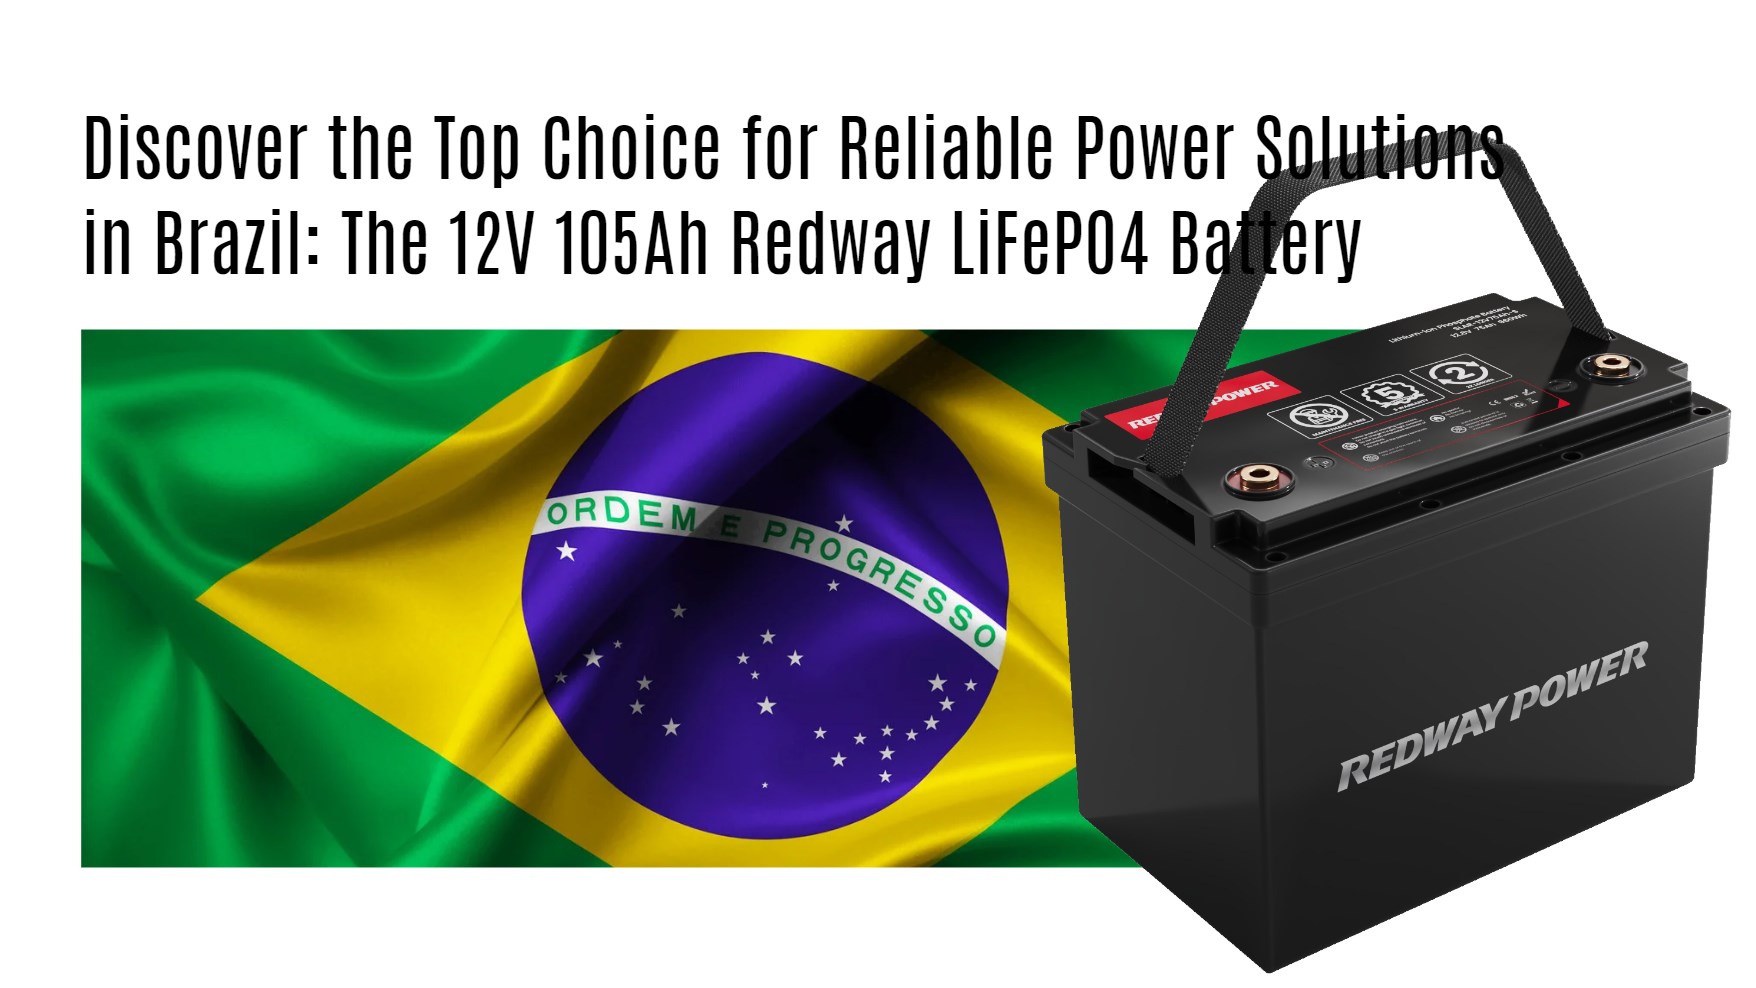 Discover the Top Choice for Reliable Power Solutions in Brazil: The 12V 105Ah Redway LiFePO4 Battery